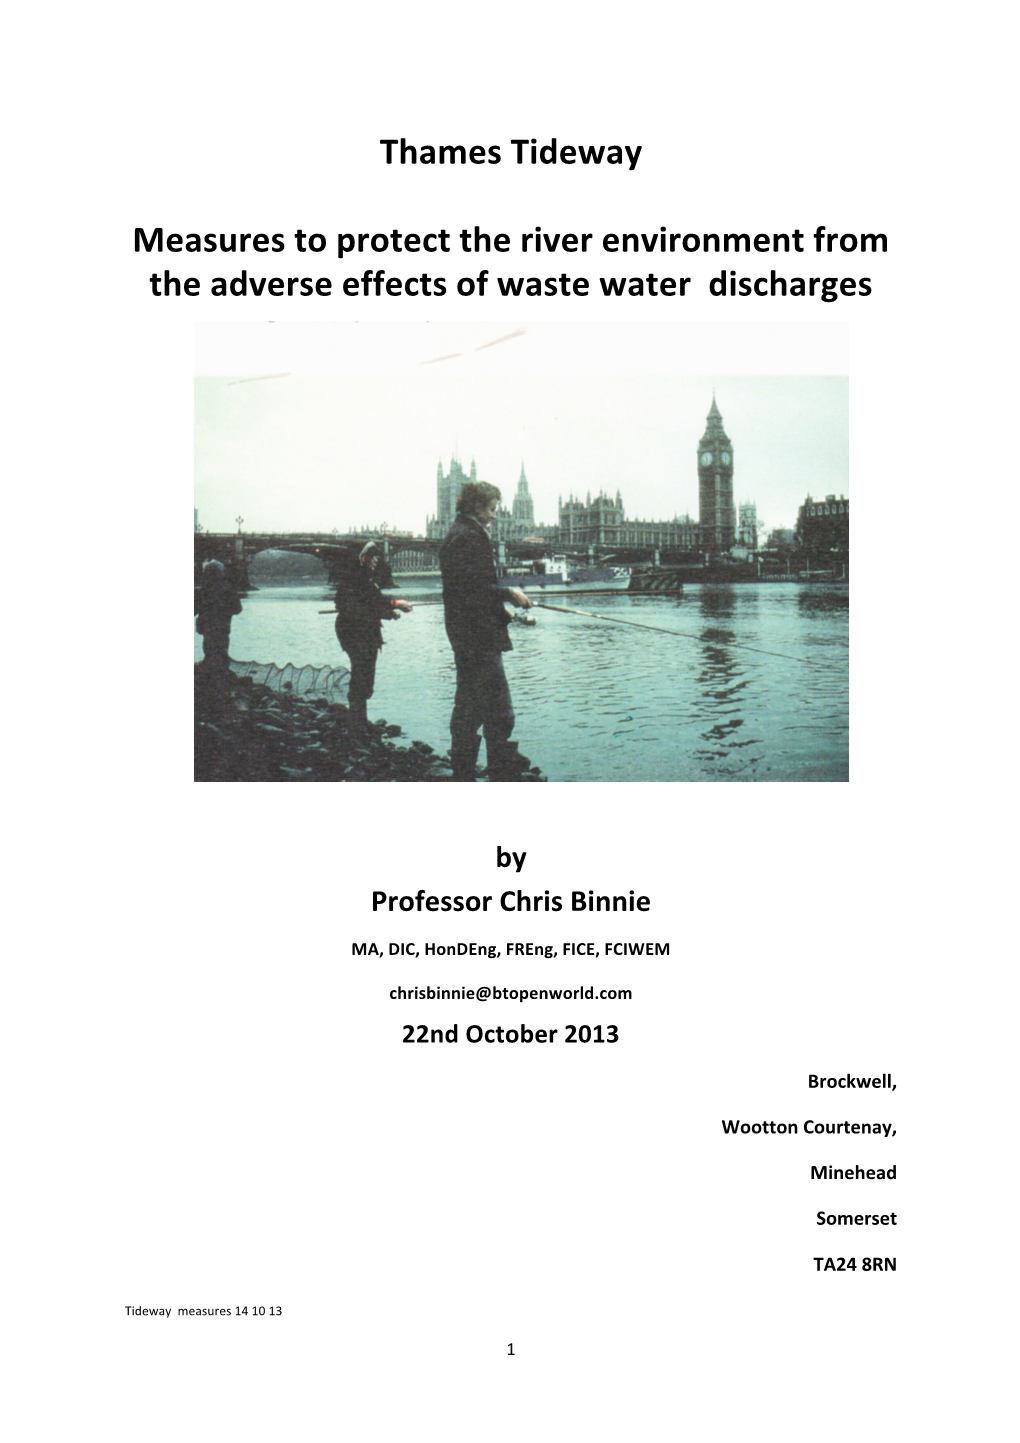 Thames Tideway Measures to Protect the River Environment from The